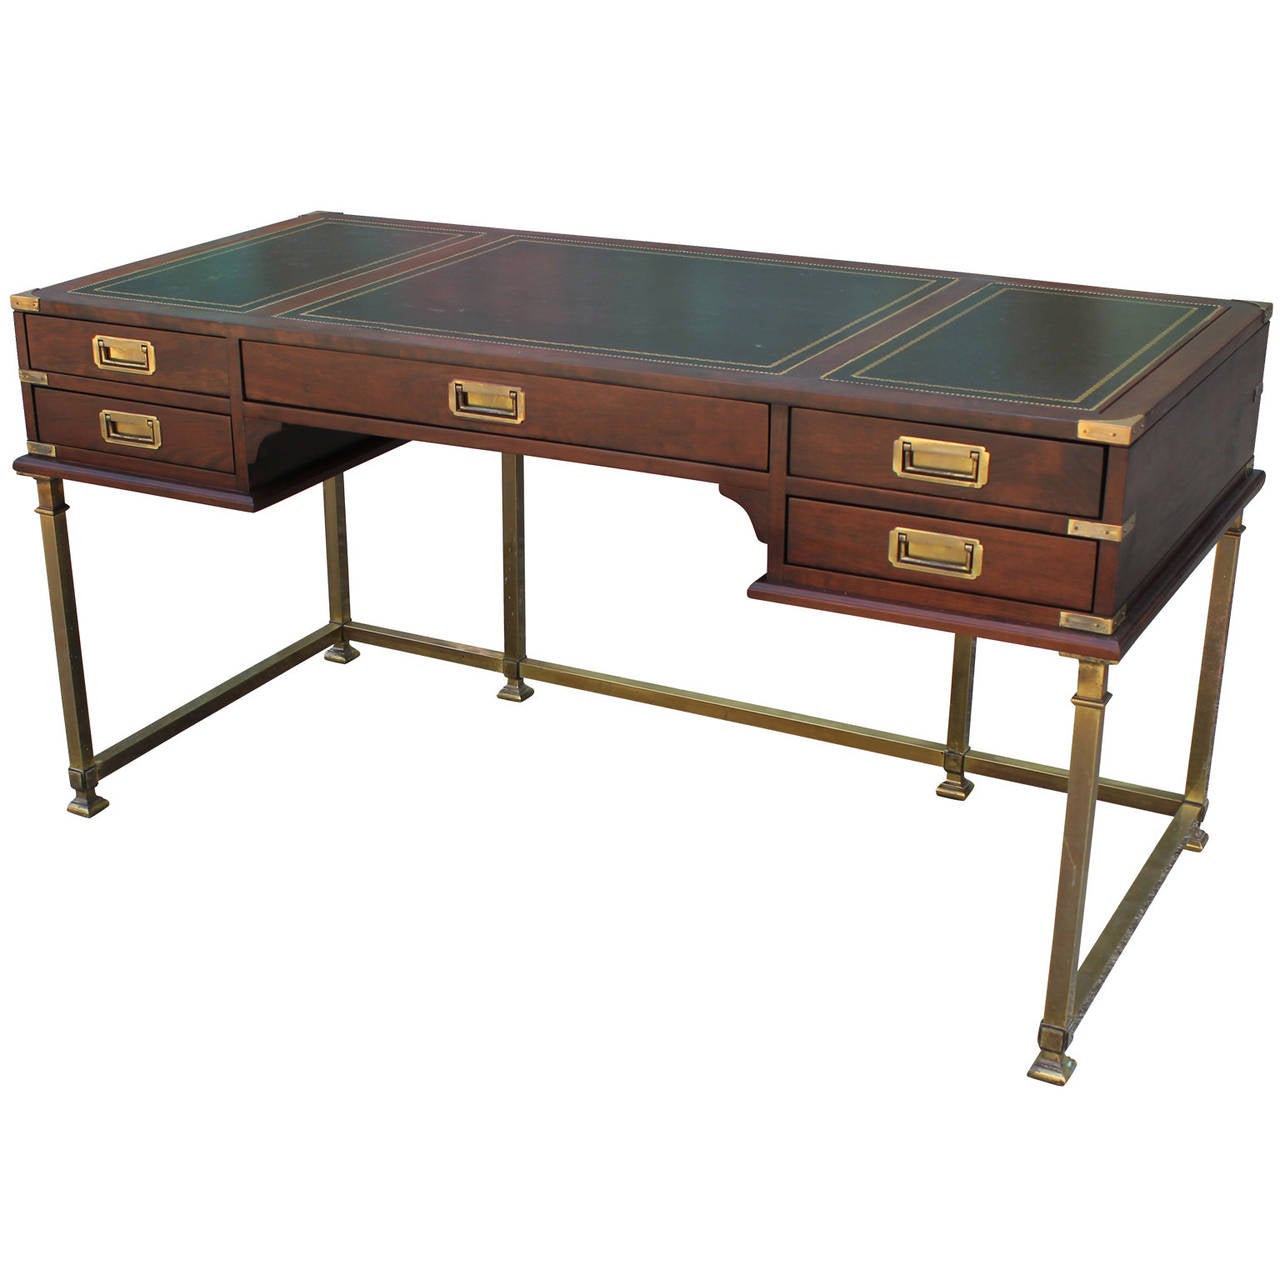 Excellent Campaign Style Desk with Brass Accents at 1stdibs